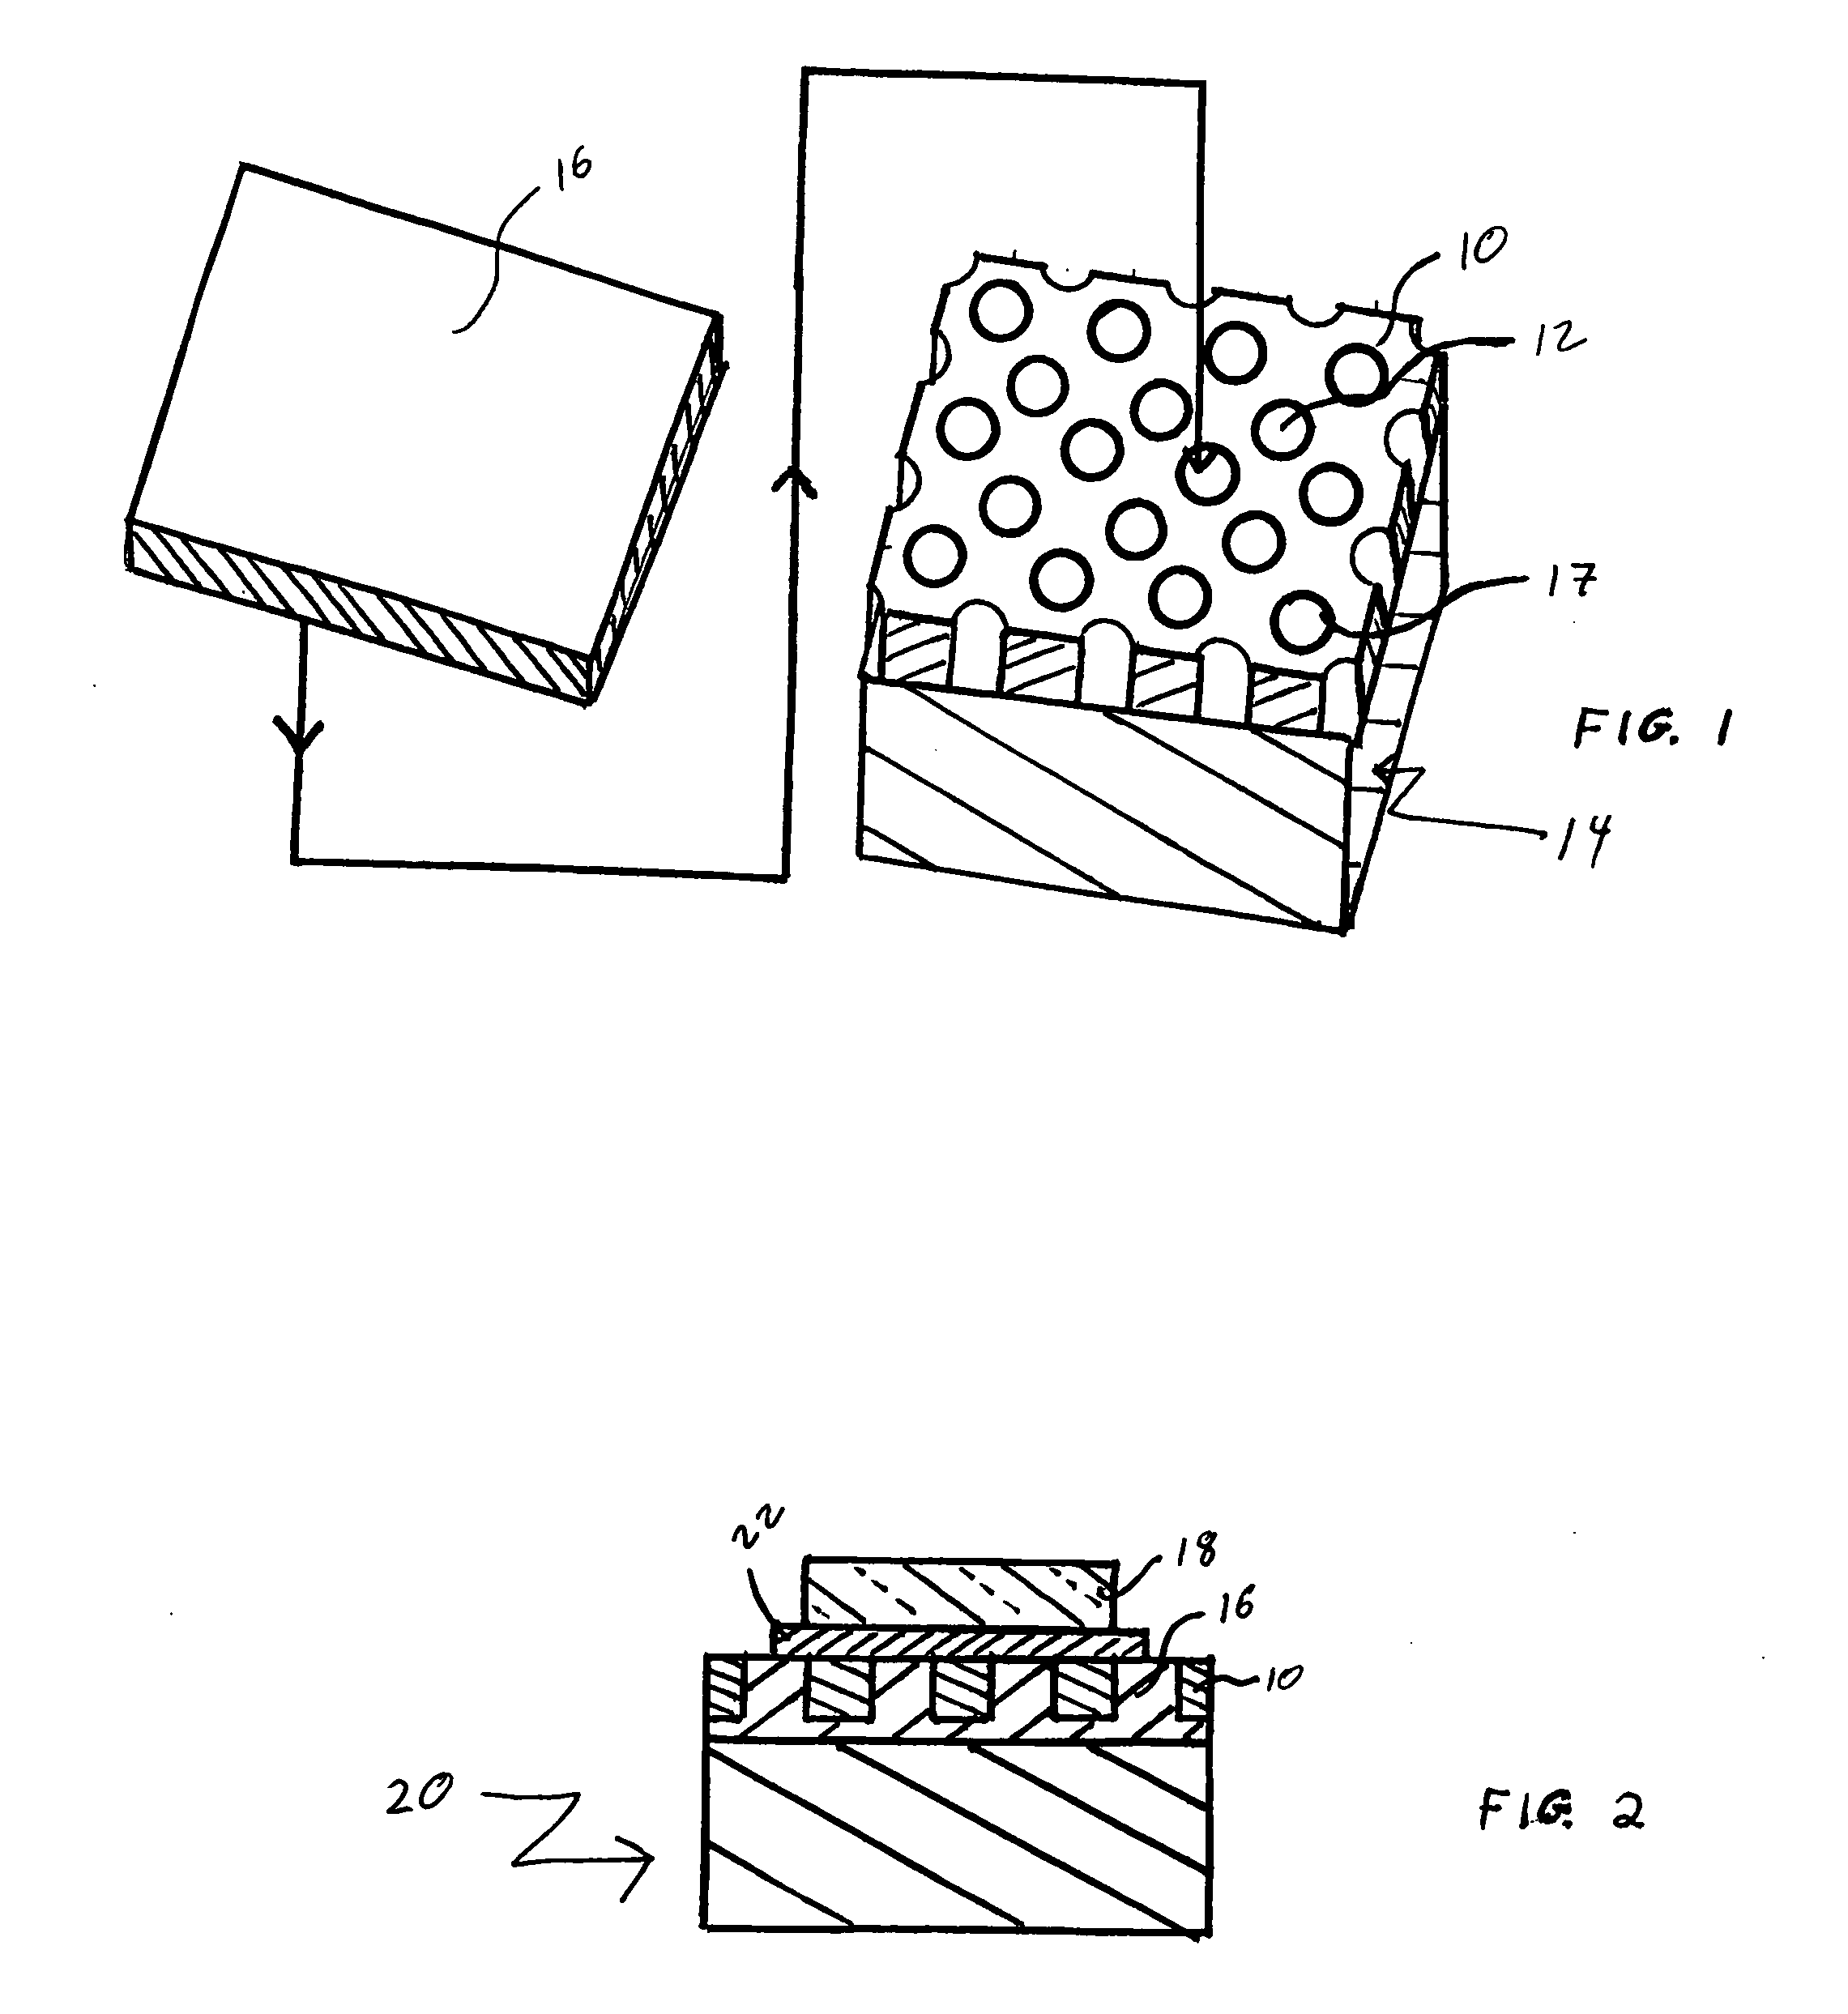 Heat spreader for use with light emitting diode